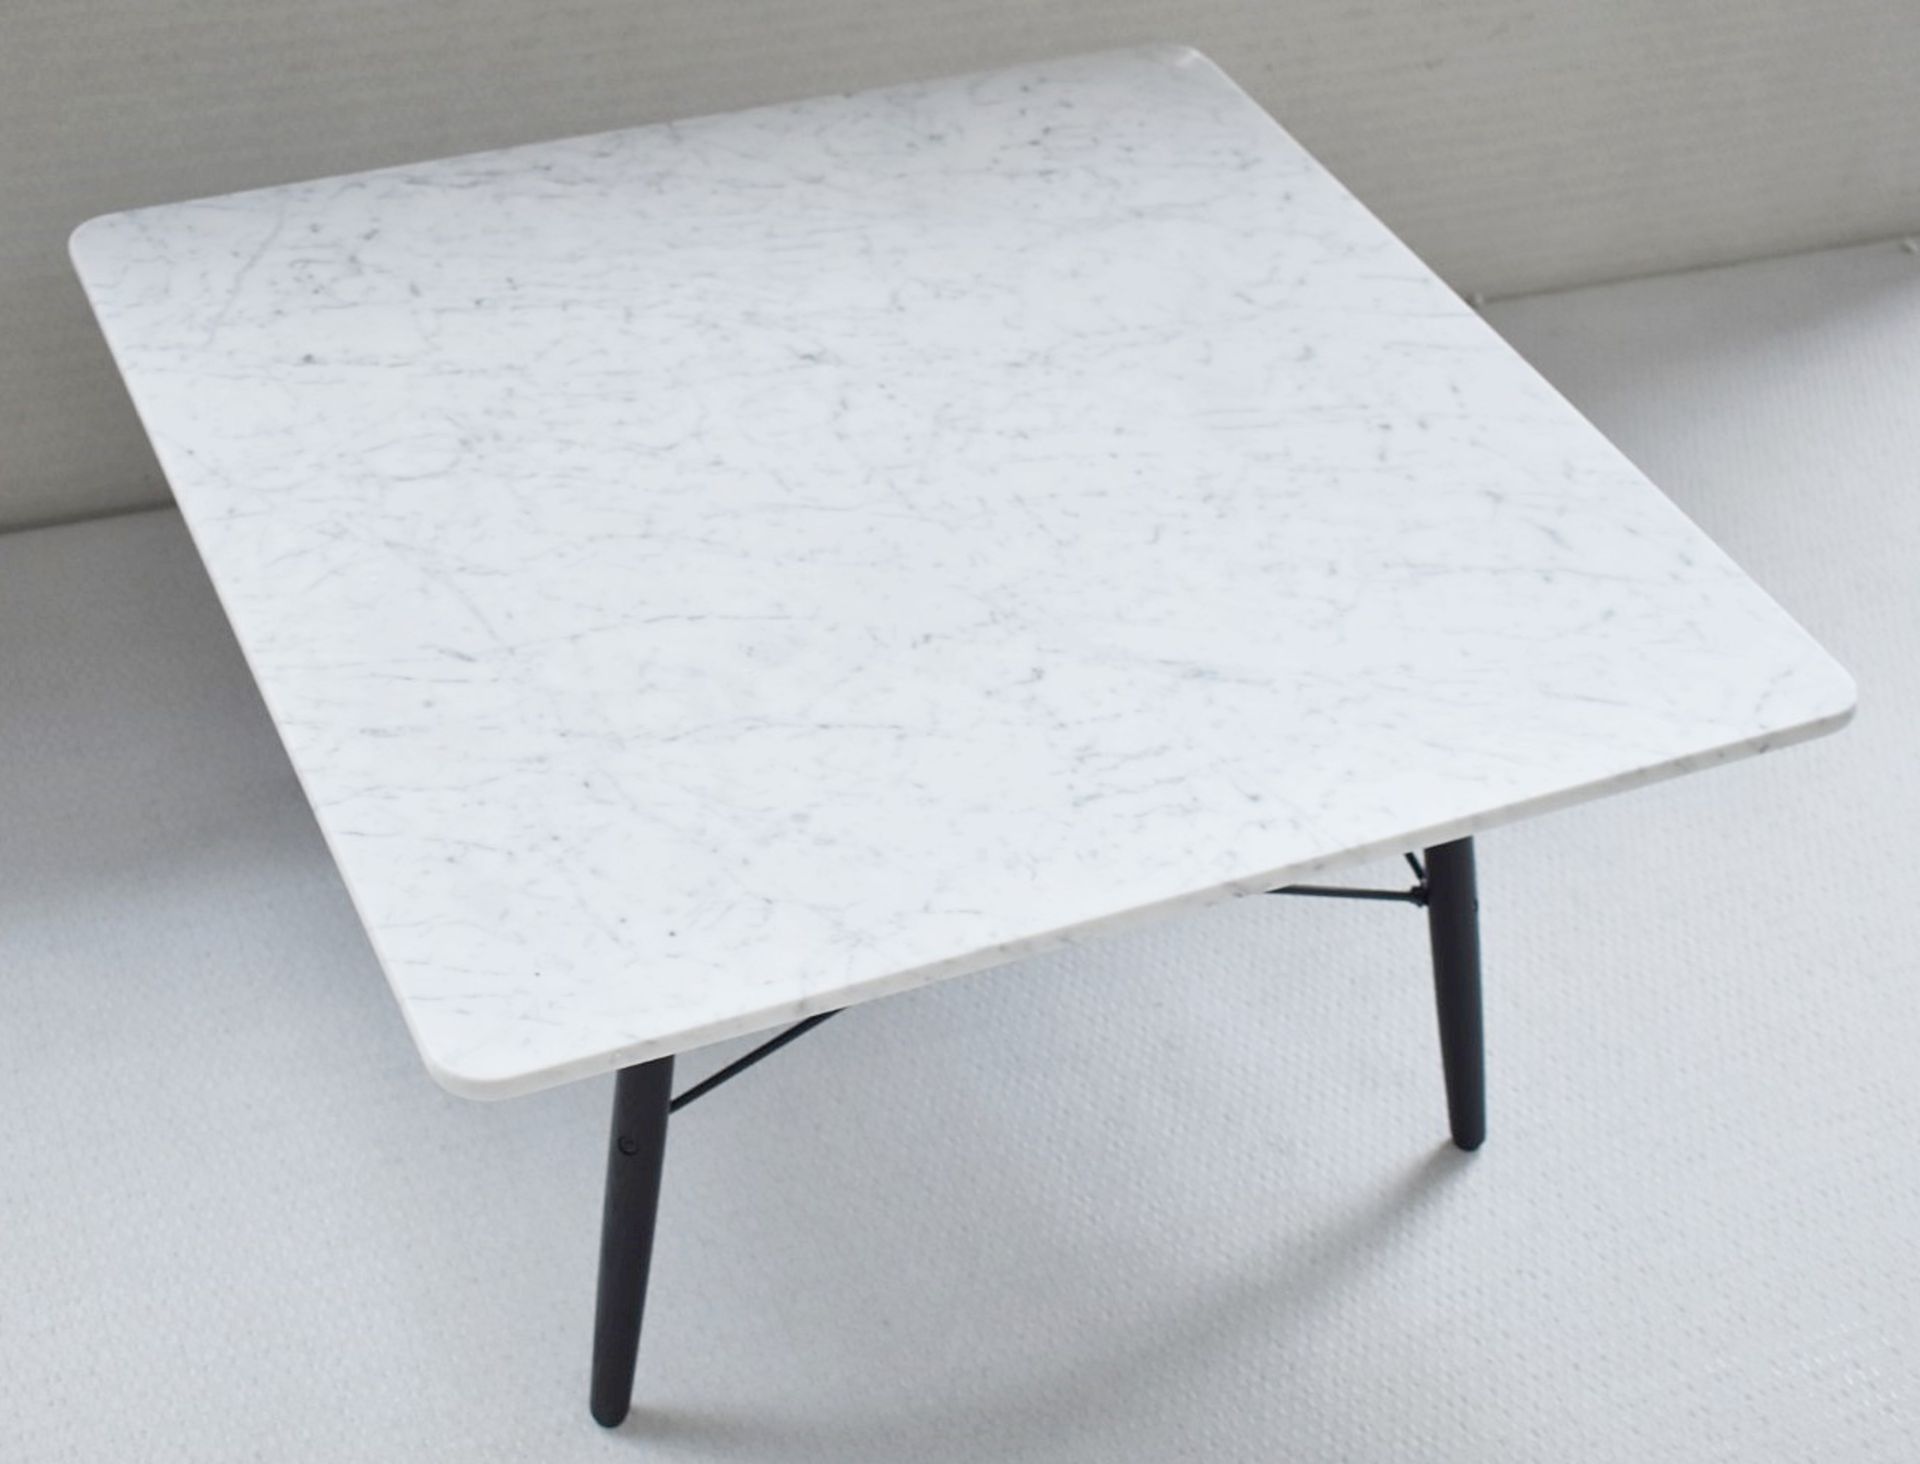 1 x VITRA Eames Marble-topped Square Coffee Table, 76x76 *Read Full Description* Original Price £1,7 - Image 2 of 6